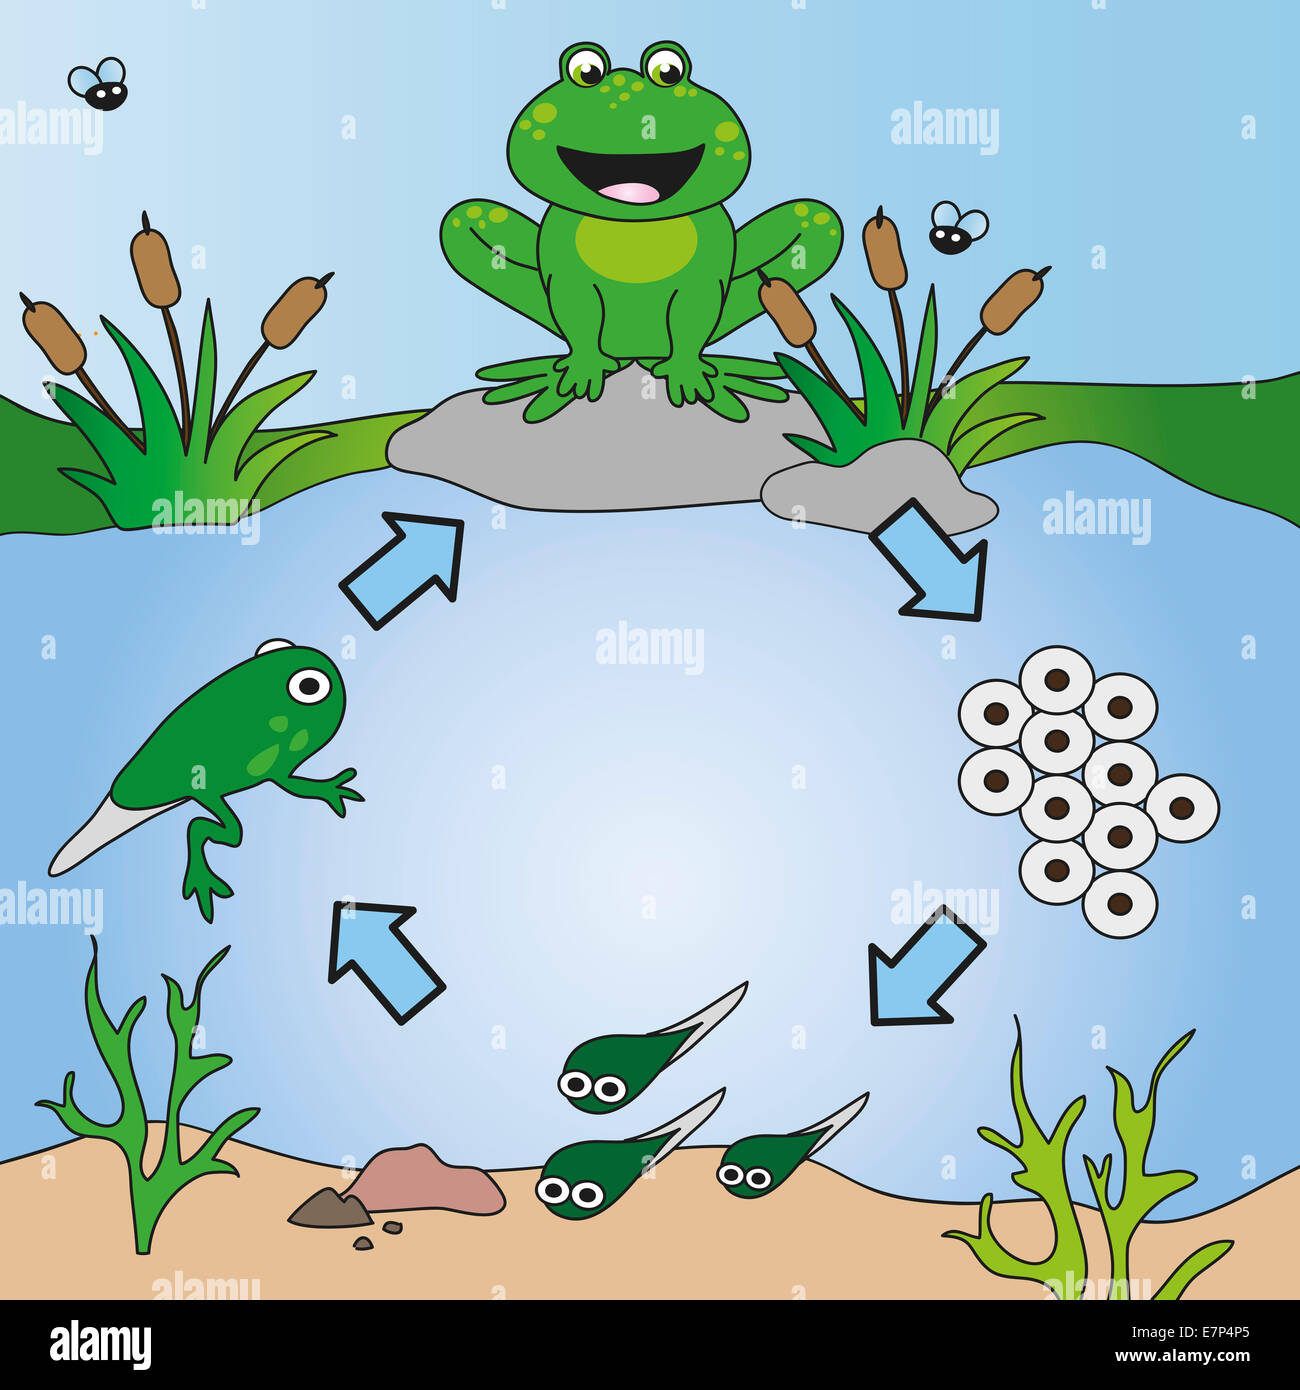 illustration of life cycle of frog Stock Photo